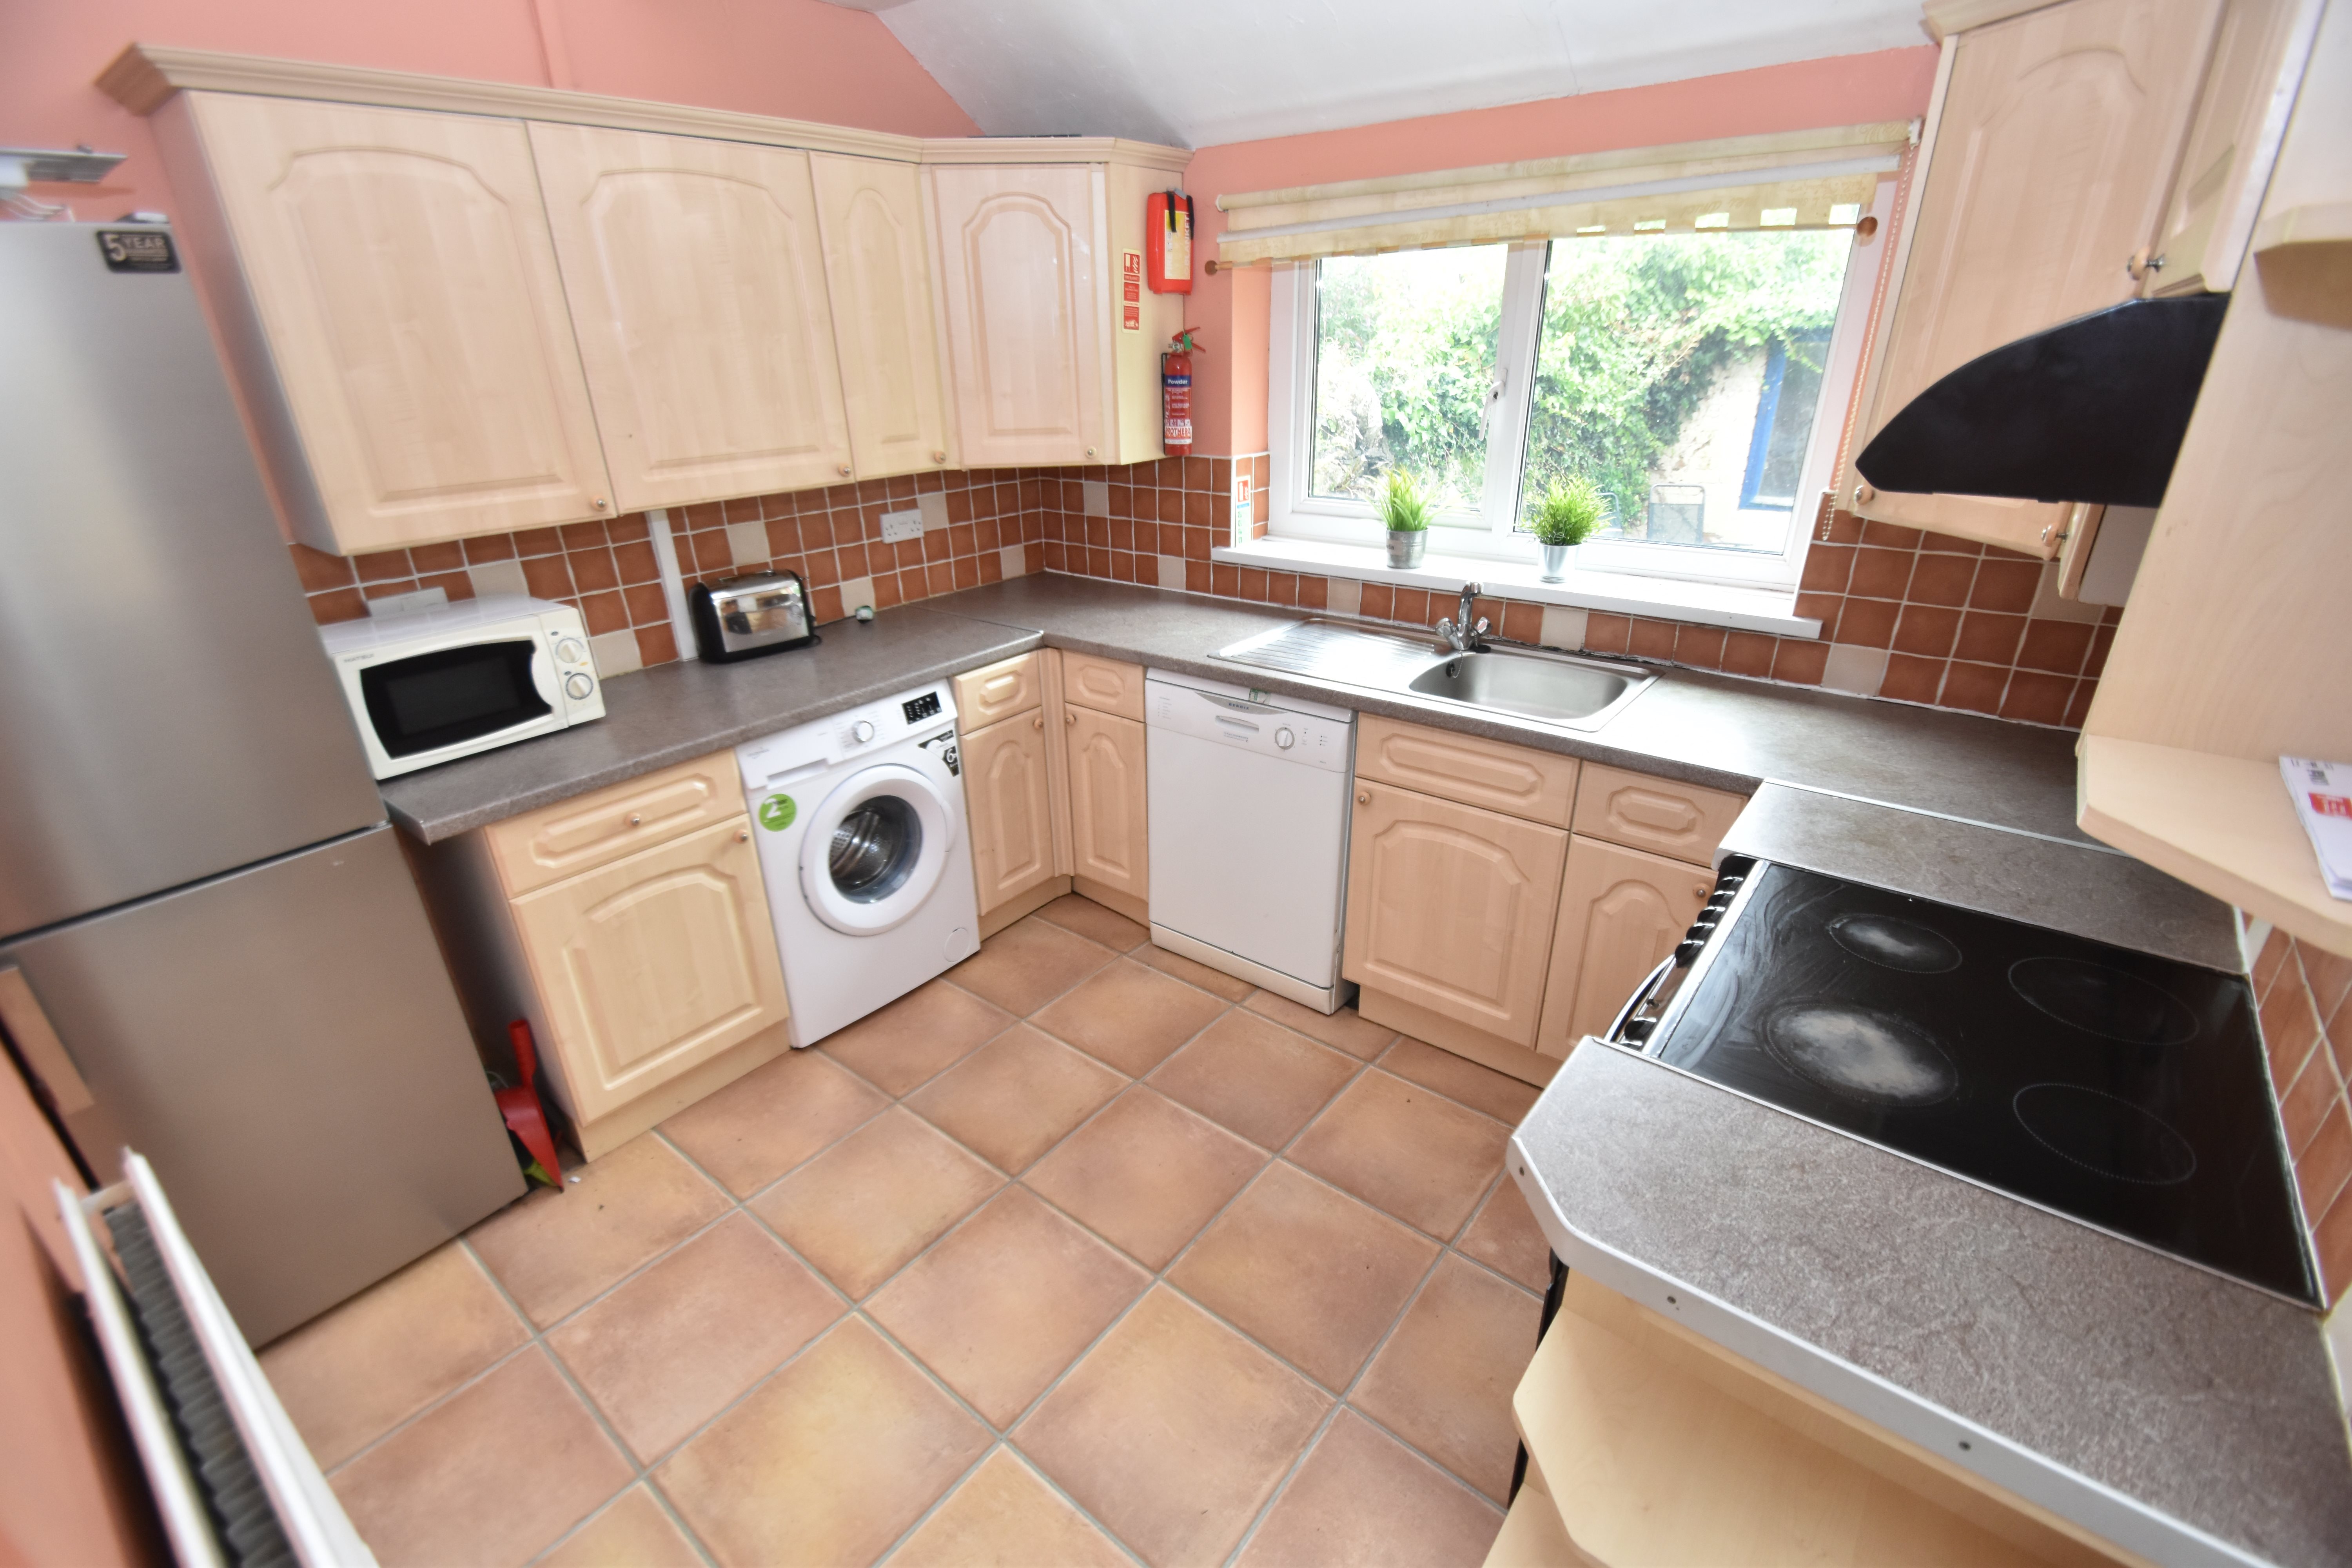 4 bed house to rent in Lisvane Street, Cathays 8